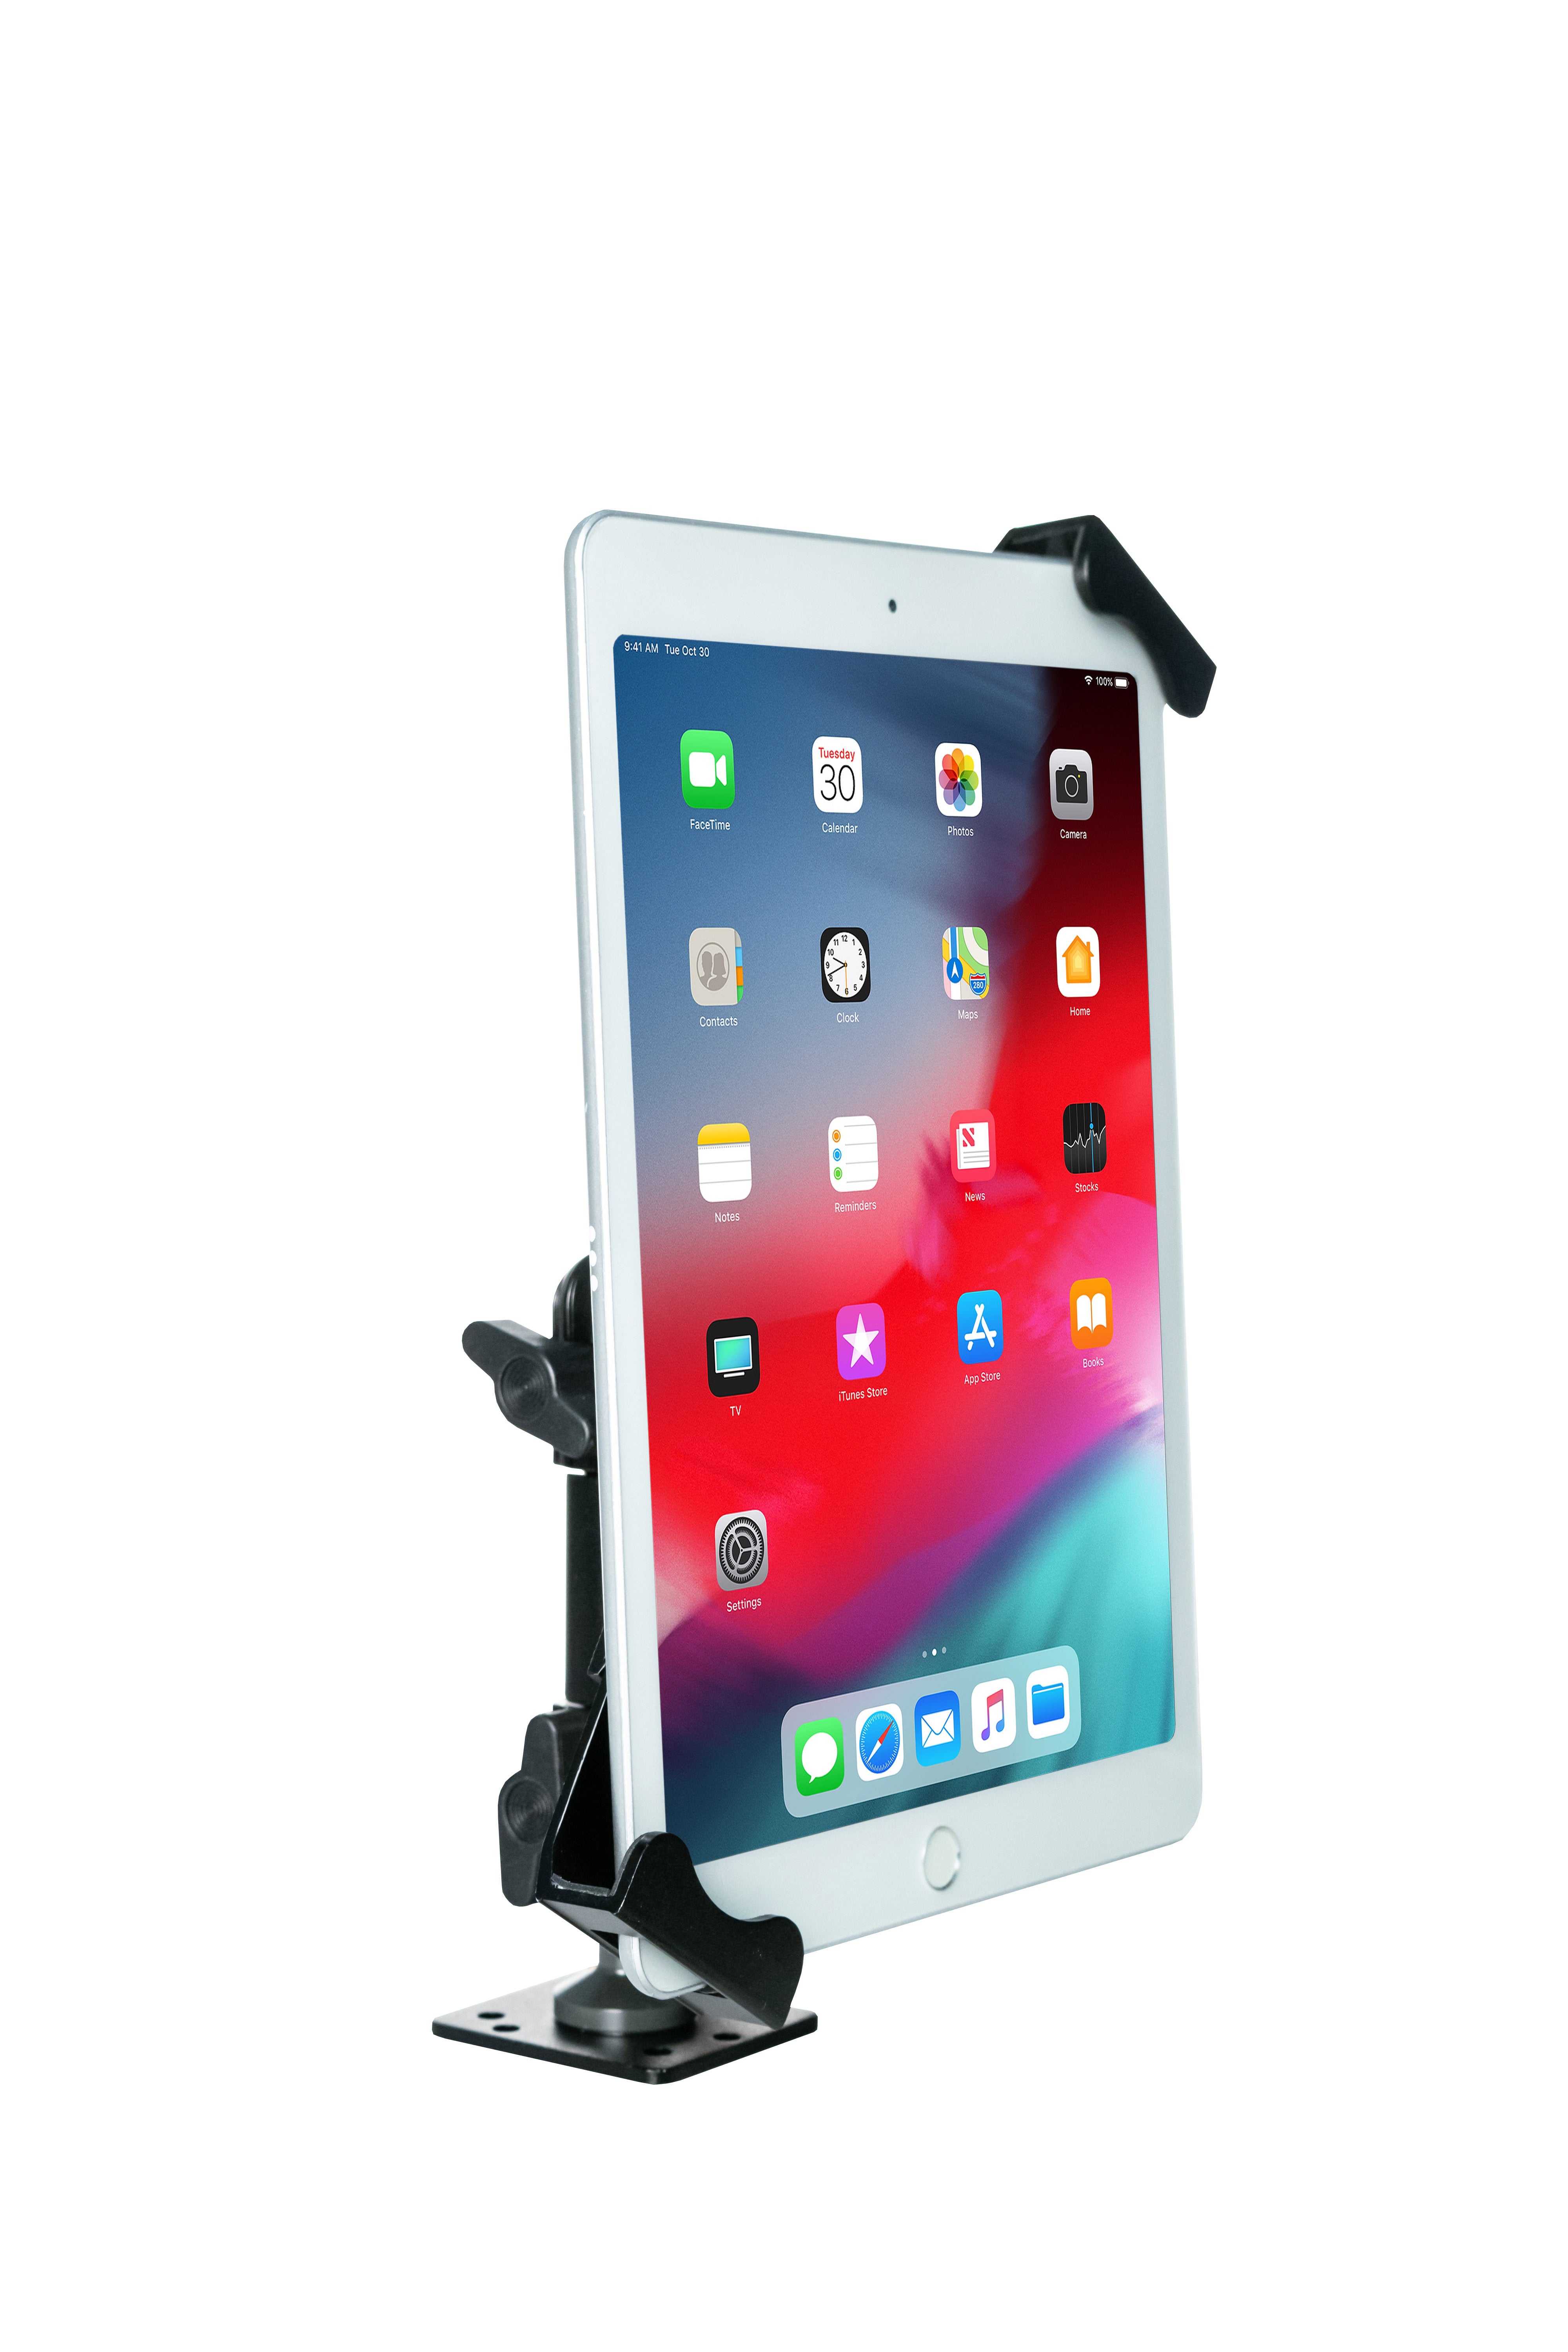 Dashboard, Tabletop, and Wall Mount for 7 - 14 Inch Tablets